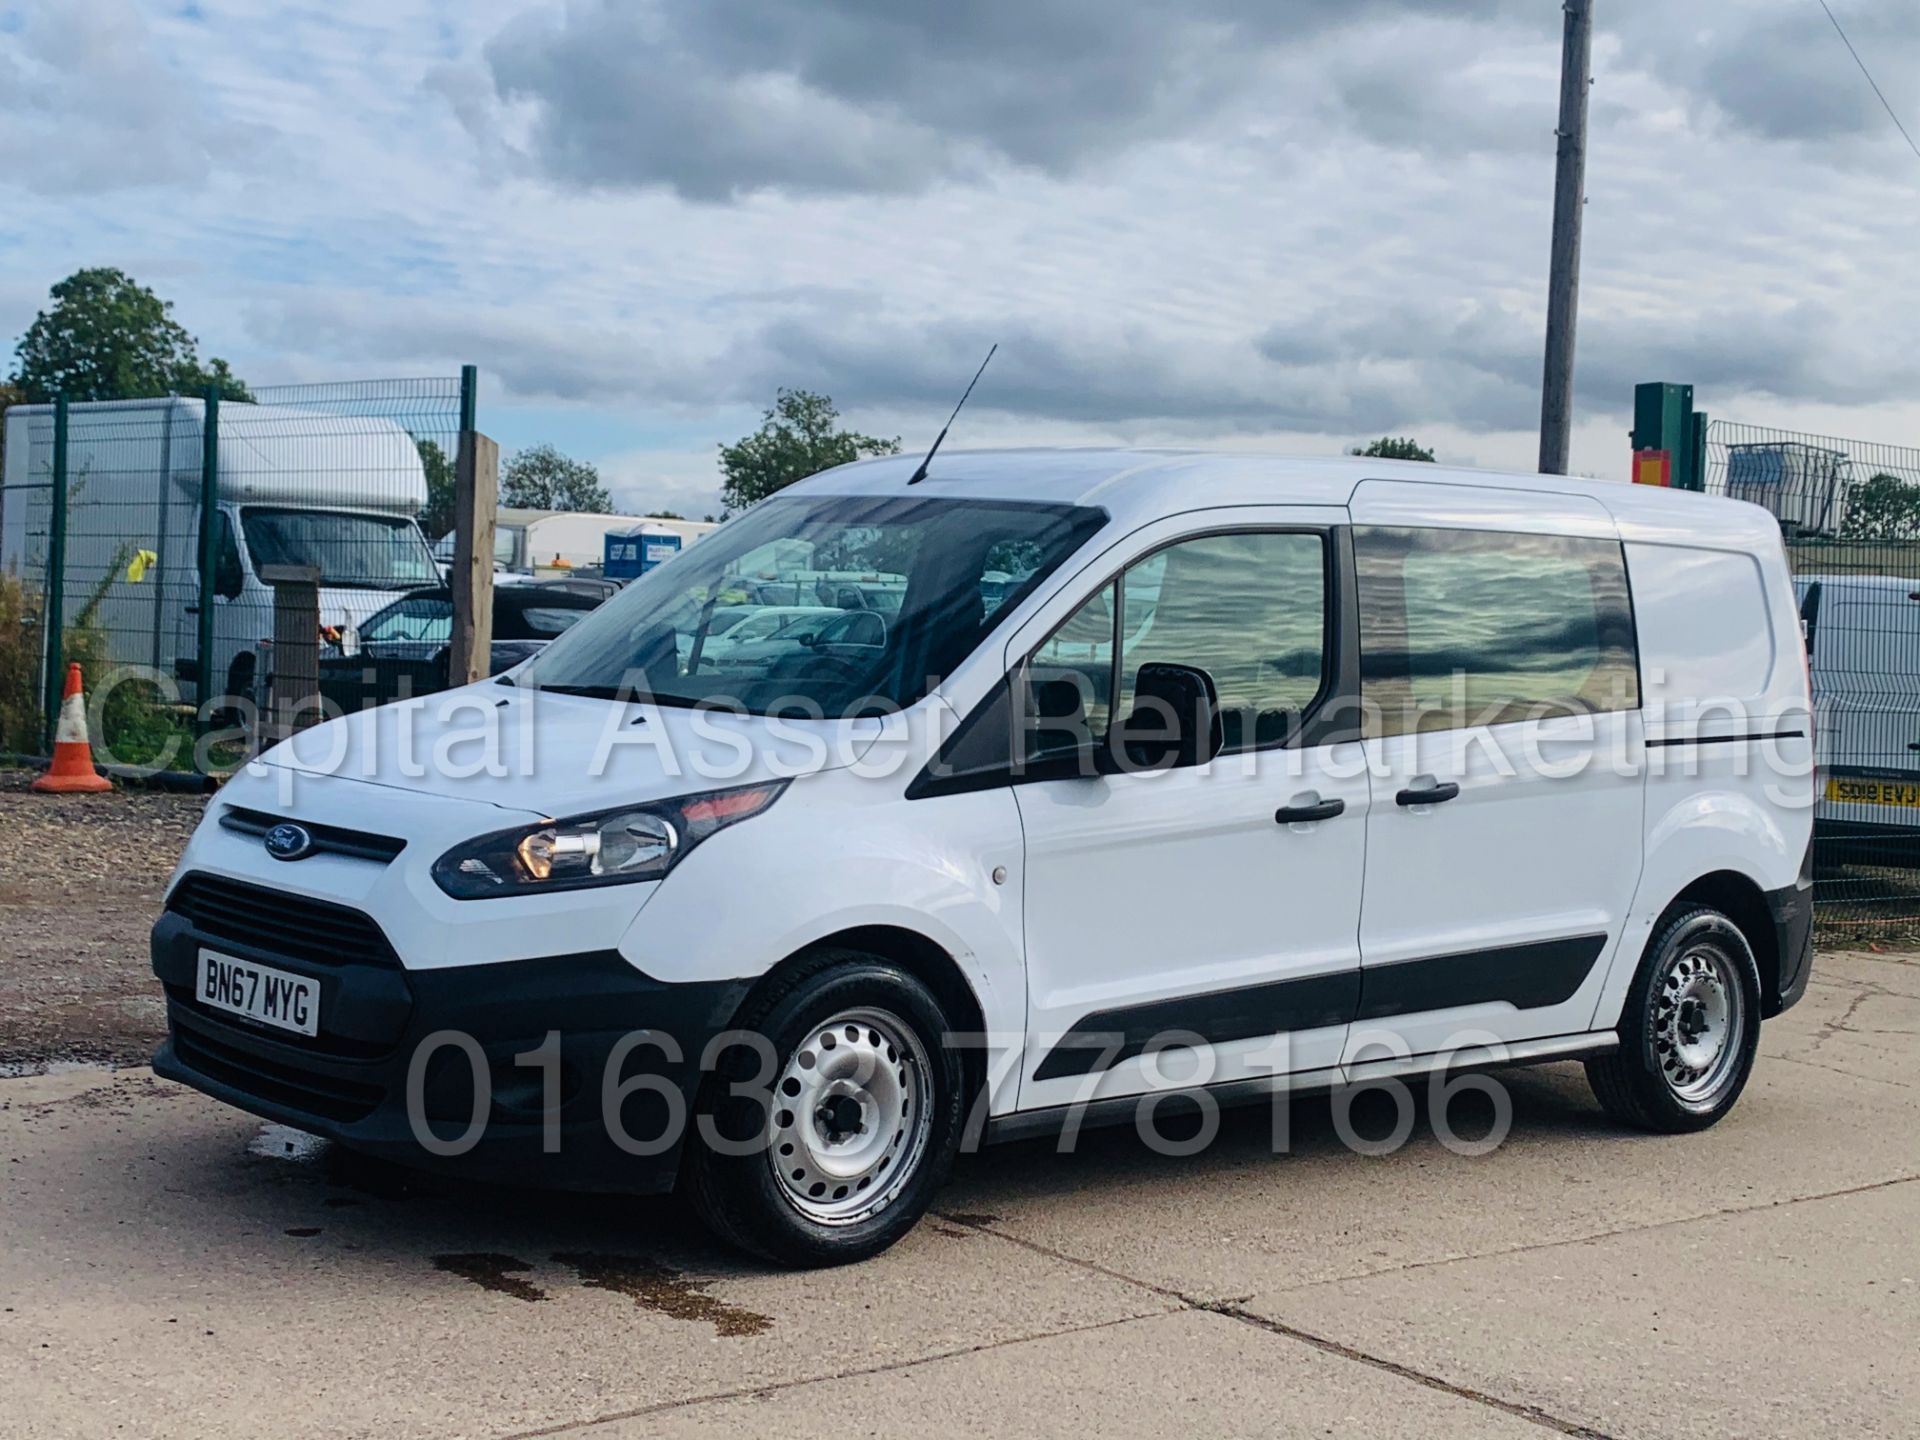 FORD TRANSIT CONNECT *LWB - 5 SEATER CREW VAN* (2018 - EURO 6) 1.5 TDCI *AIR CON* (1 OWNER)